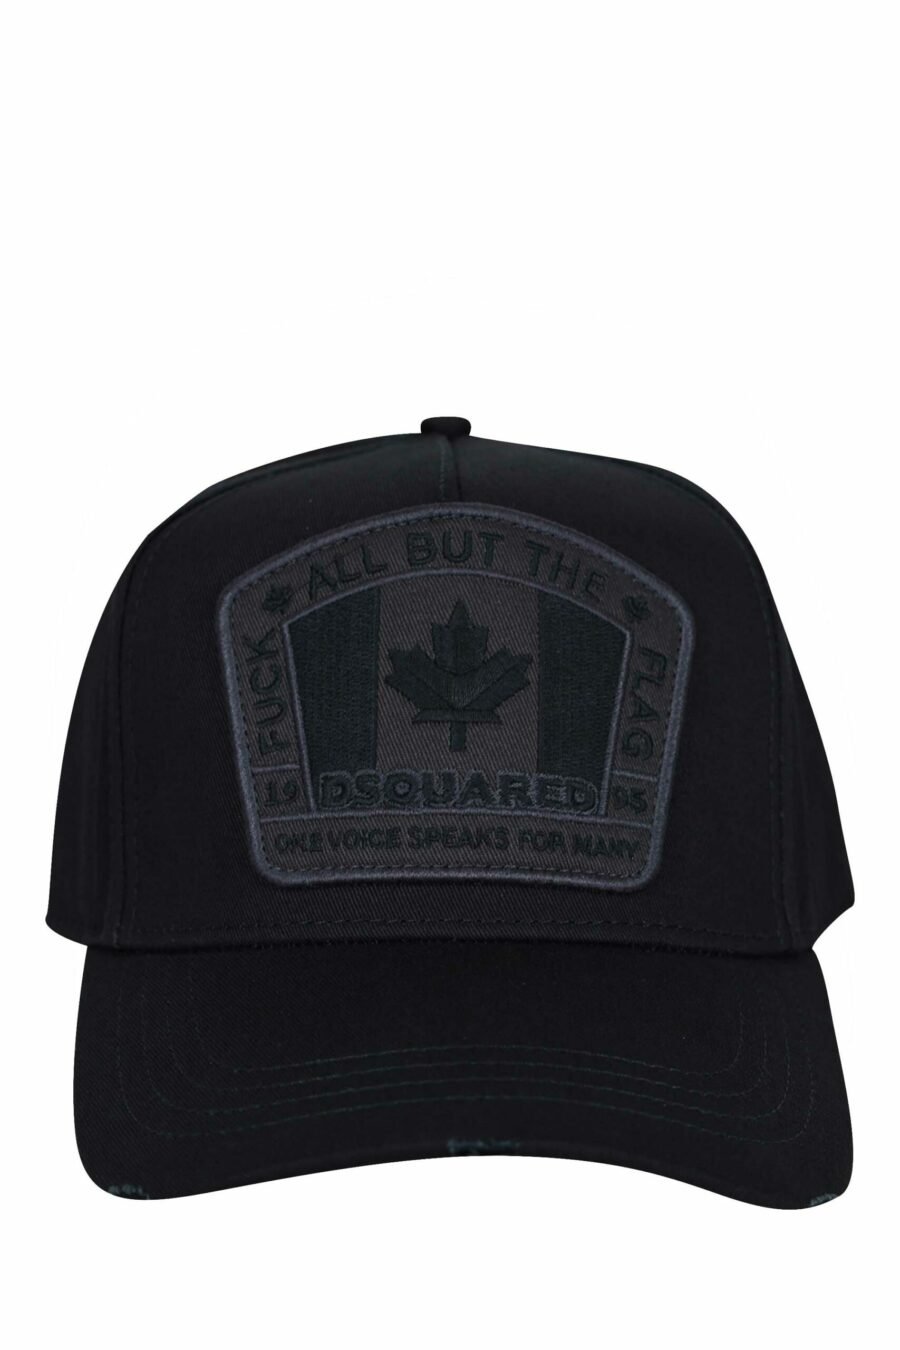 Black cap with monochrome Canada logo patch - 8055777160626 scaled